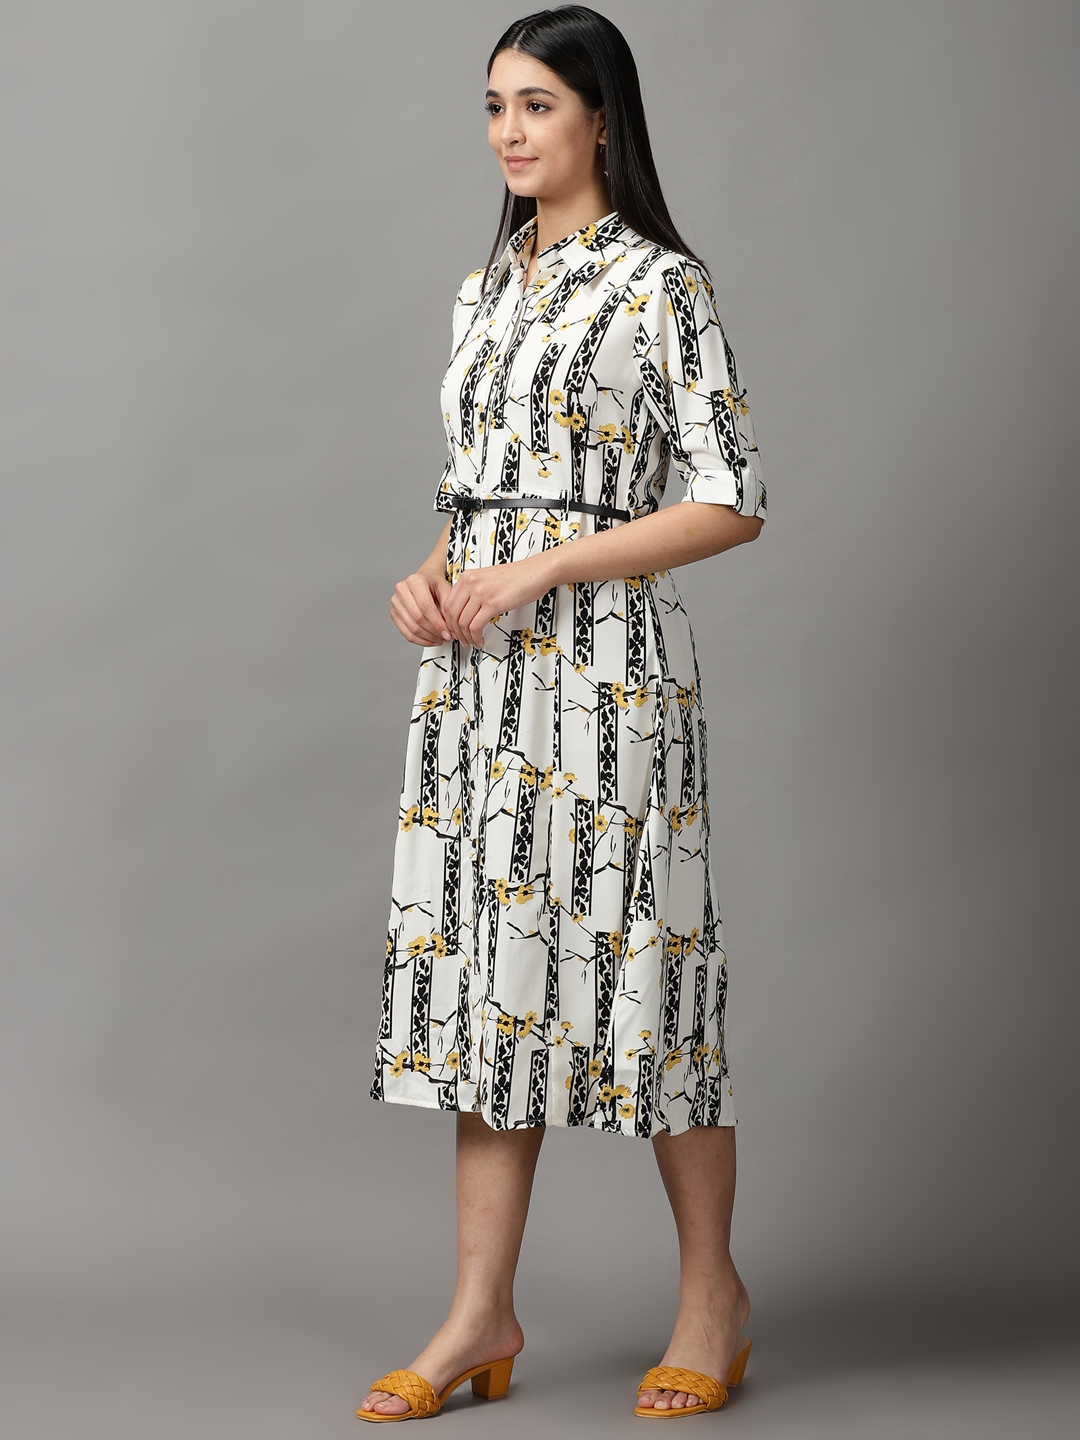 Women's White Polyester Floral Dresses